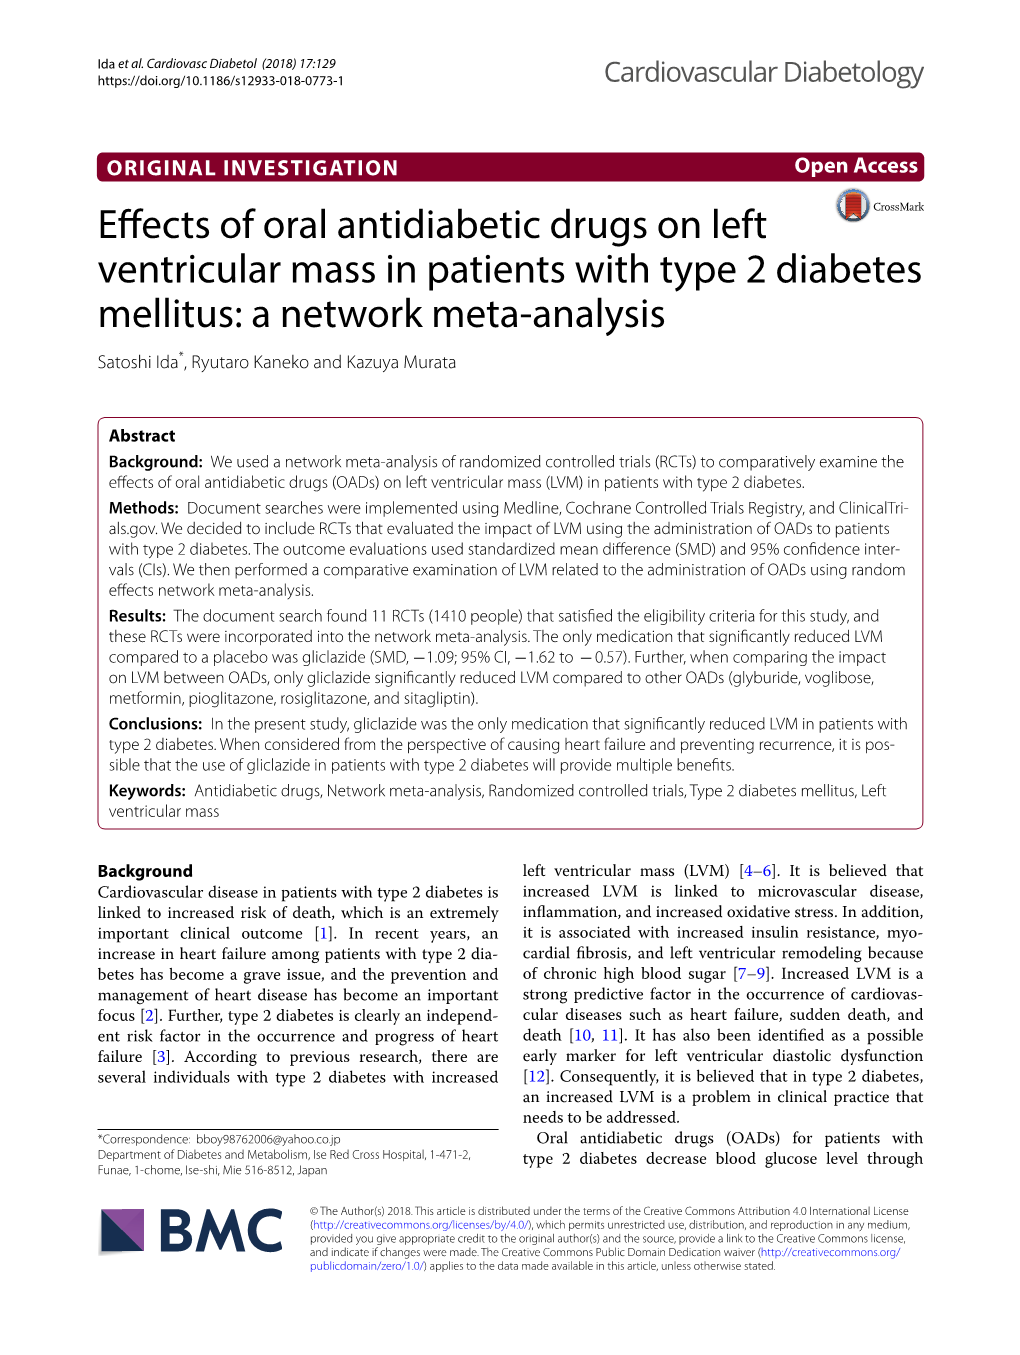 Effects of Oral Antidiabetic Drugs on Left Ventricular Mass in Patients with Type 2 Diabetes Mellitus: a Network Meta-Analysis